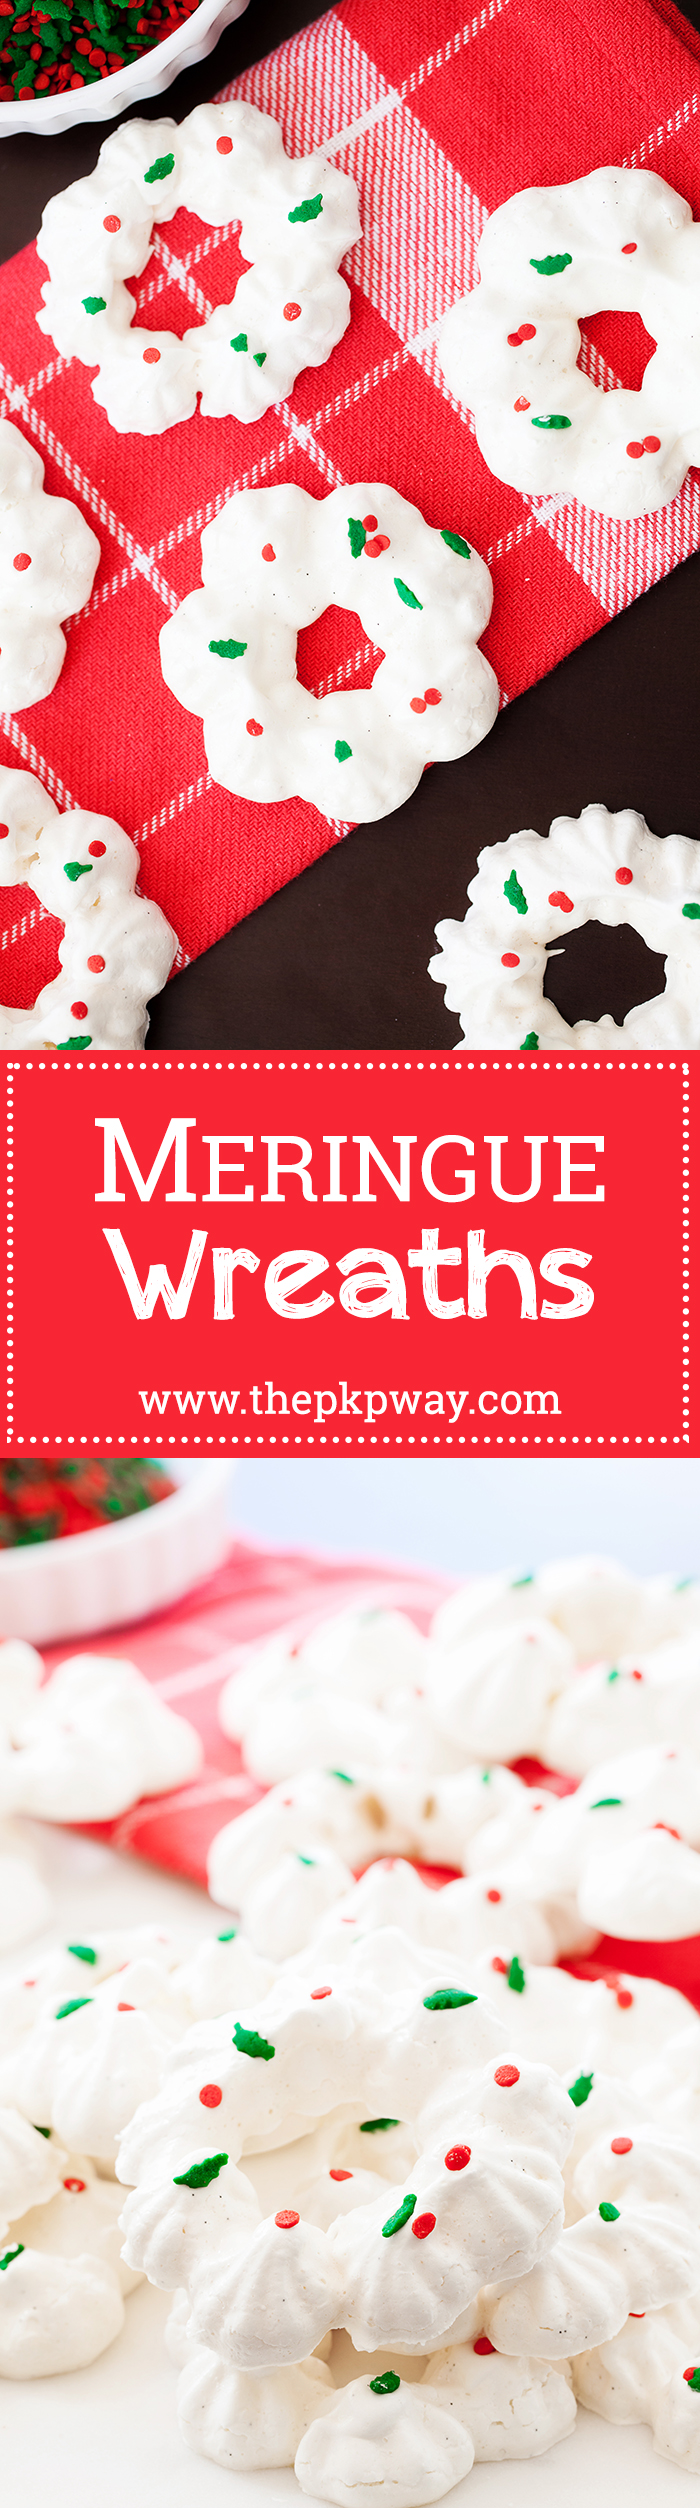 Bring these meringue wreaths to your next holiday party and add some cheer to the holiday table.